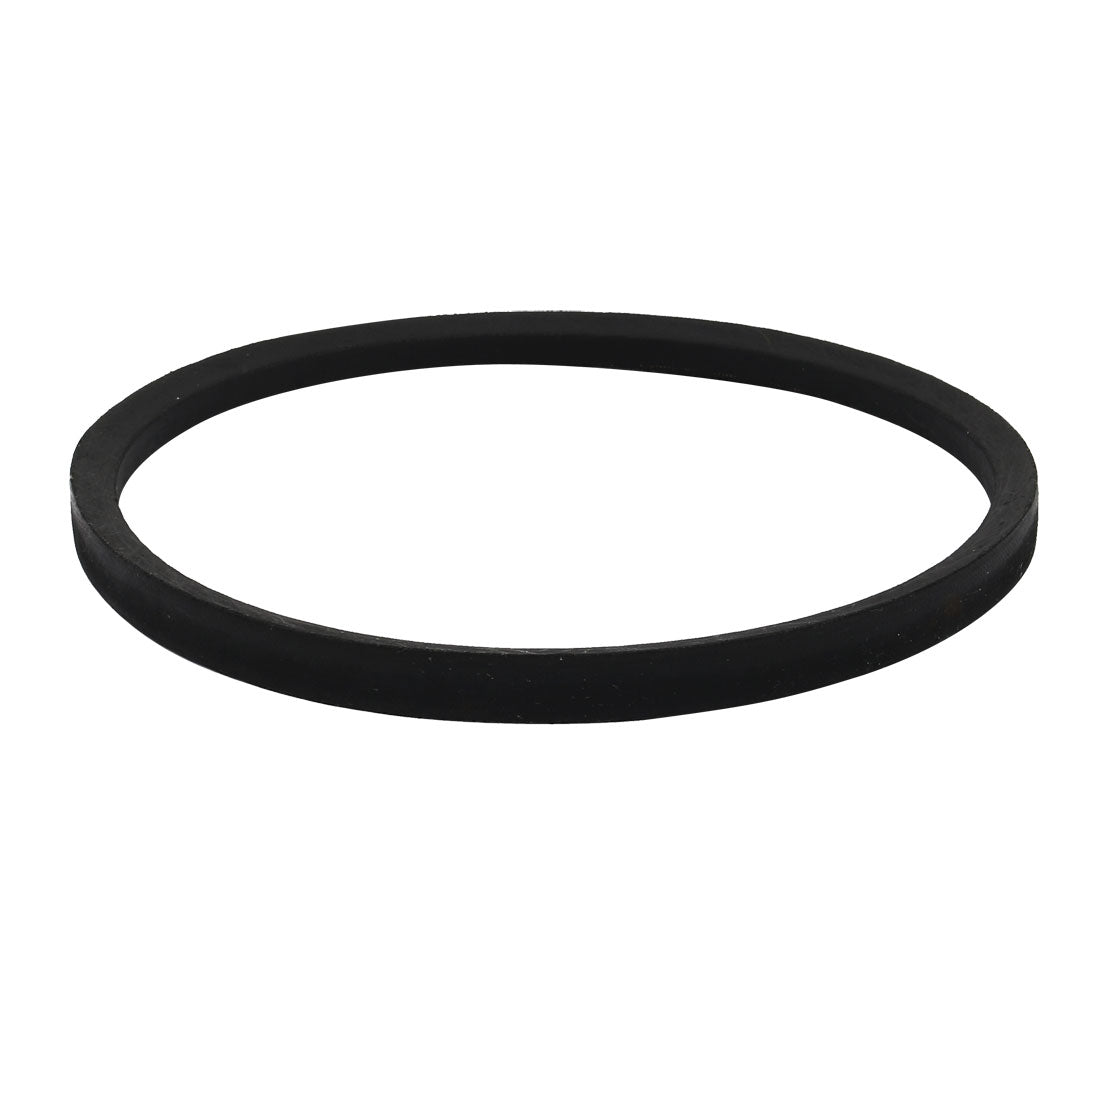 uxcell Uxcell A500 Rubber Transmission Drive Belt V-Belt 8mm Thick 500mm Inner Girth for Washing Machine